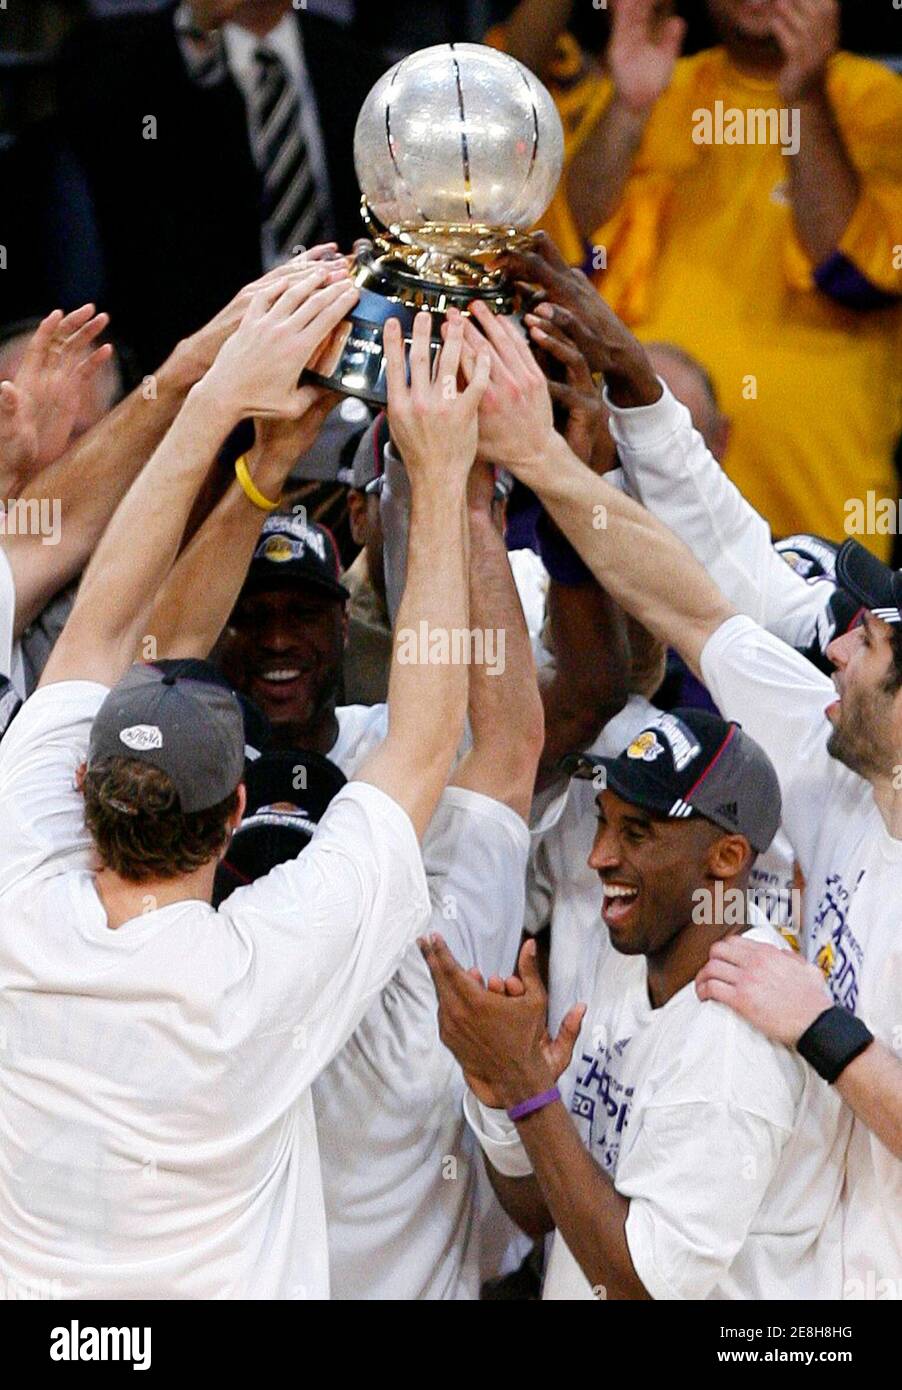 Los Angeles Lakers Kobe Bryant celebrates with his teammates and the Western Conference trophy after defeating the San Antonio Spurs in Game 5 of their NBA Western Conference final basketball playoff series in Los Angeles, May 29, 2008.     REUTERS/Gus Ruelas (UNITED STATES) Stock Photo